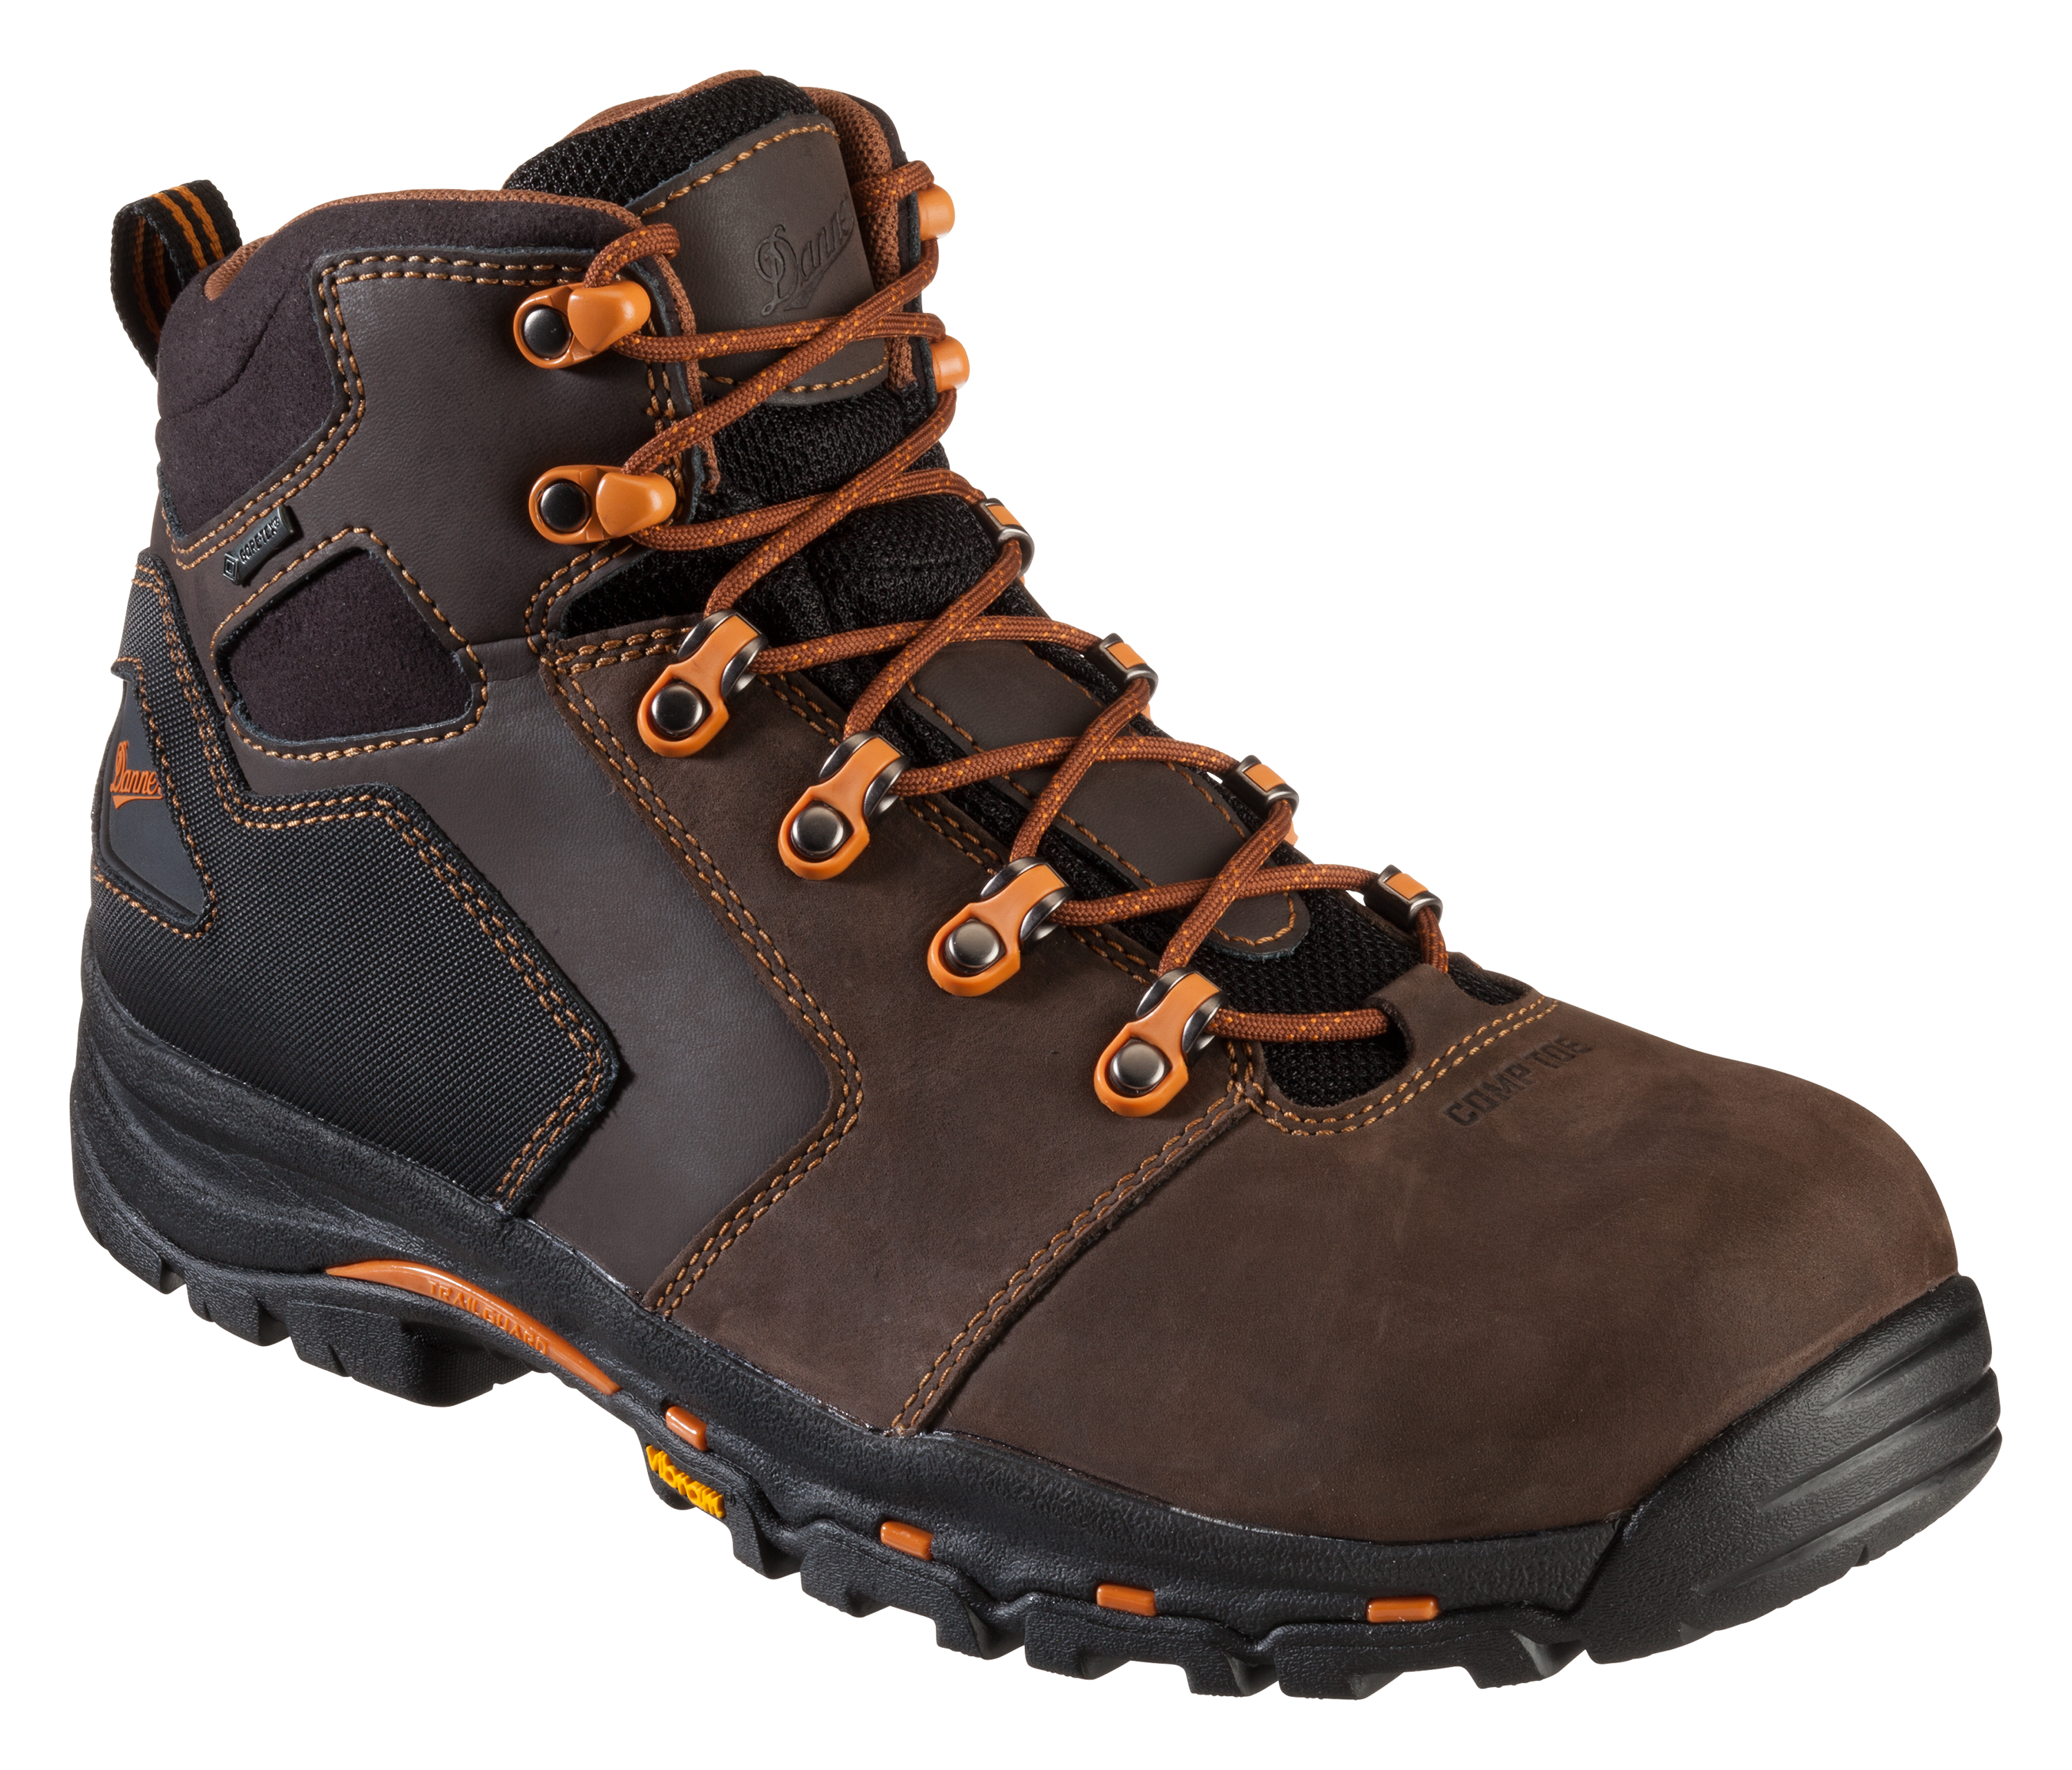 Danner Vicious GORE-TEX Non-Metallic Safety Toe Work Boots for Men - Brown - 9W